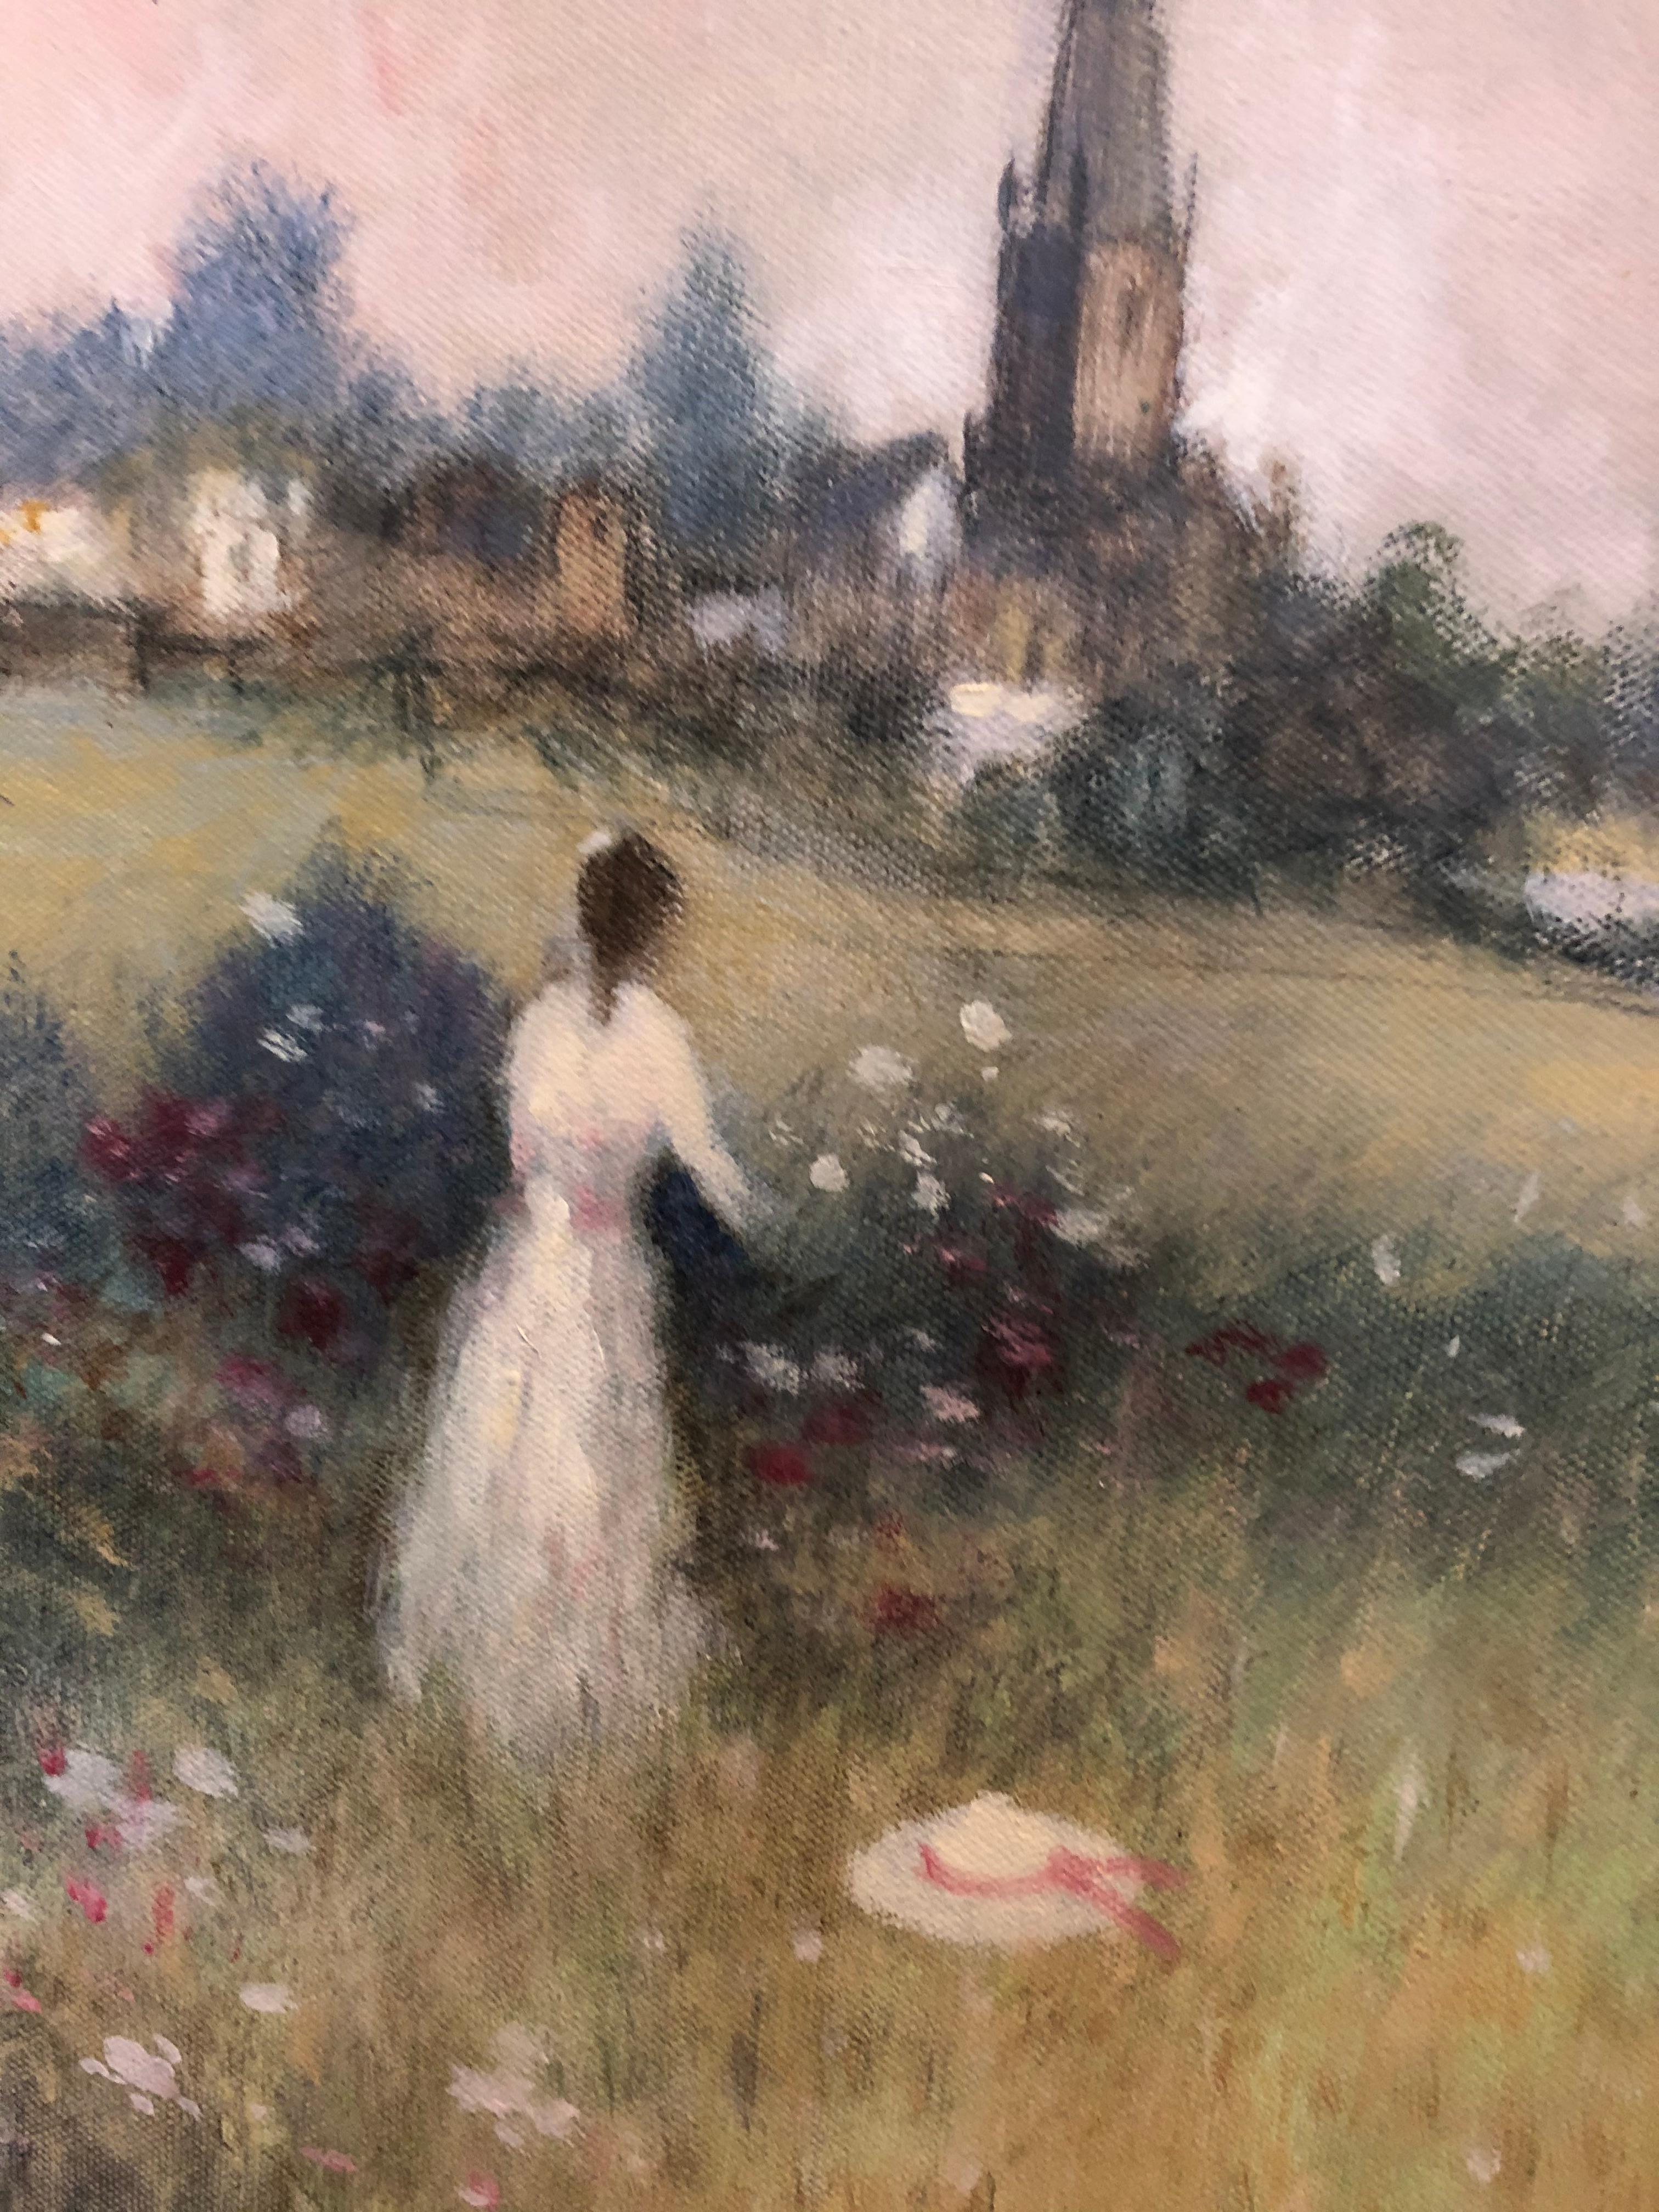 Enchanting jewel like impressionist style large landscape of a lady in flowing white dress, with a view of sheep and church in the distance, perfectly composed with canopy of trees like the curtains on a proscenium stage. By listed artist James